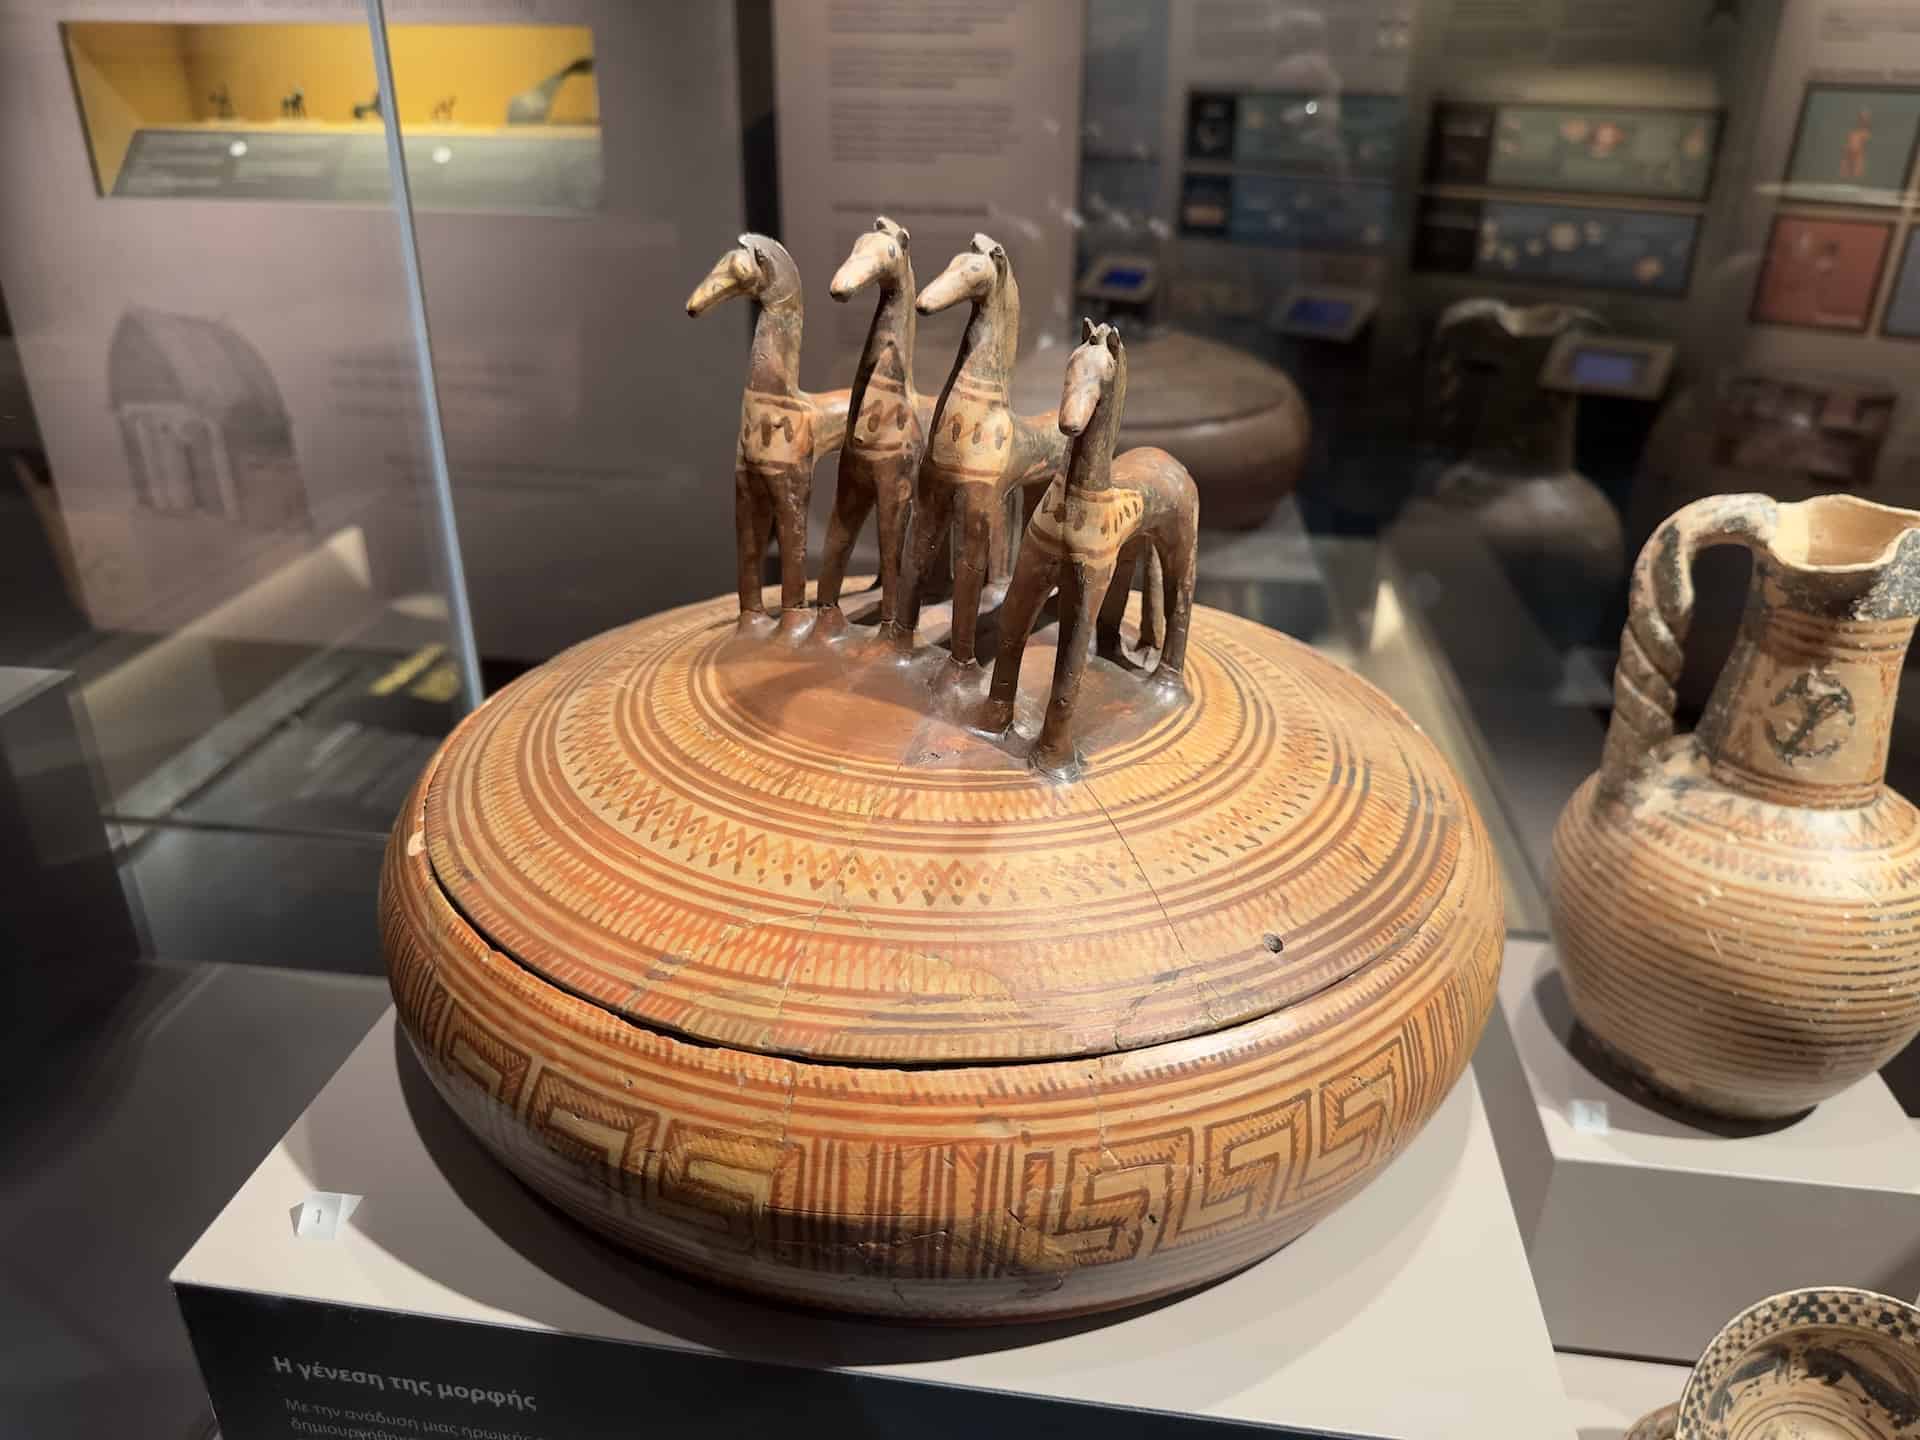 Large Attic pyxis with lid crowned by four horse figurines; 760-750 BC in Ancient Greek Art at the Museum of Cycladic Art in Athens, Greece